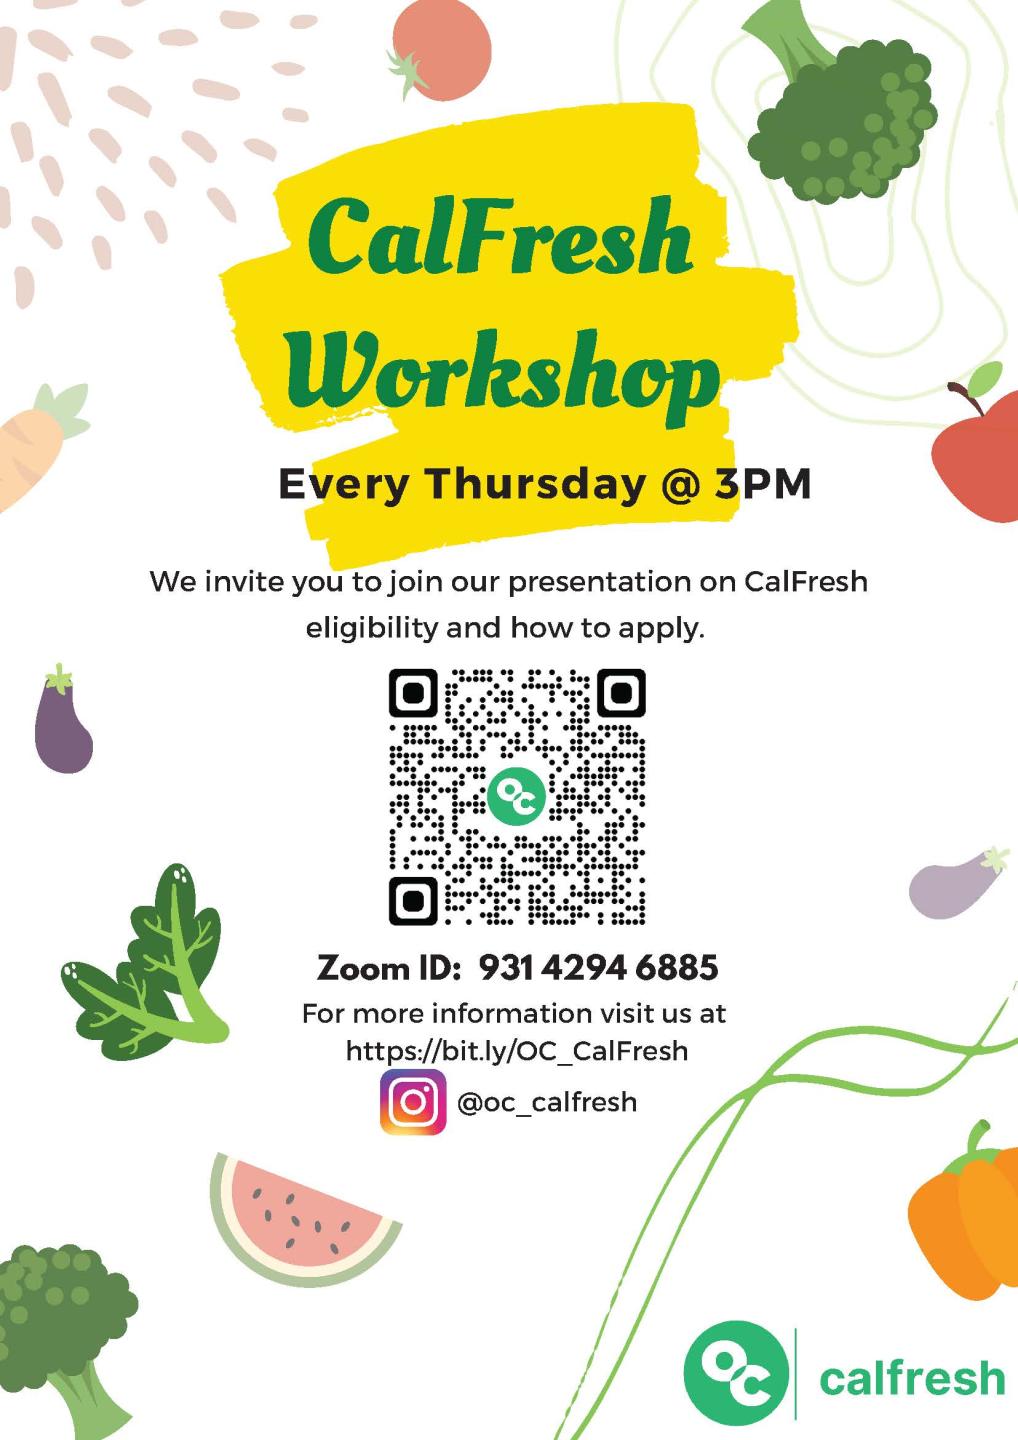 Calfresh Workshop Every Thursday at 3 pm. Zoom ID: 93142946885